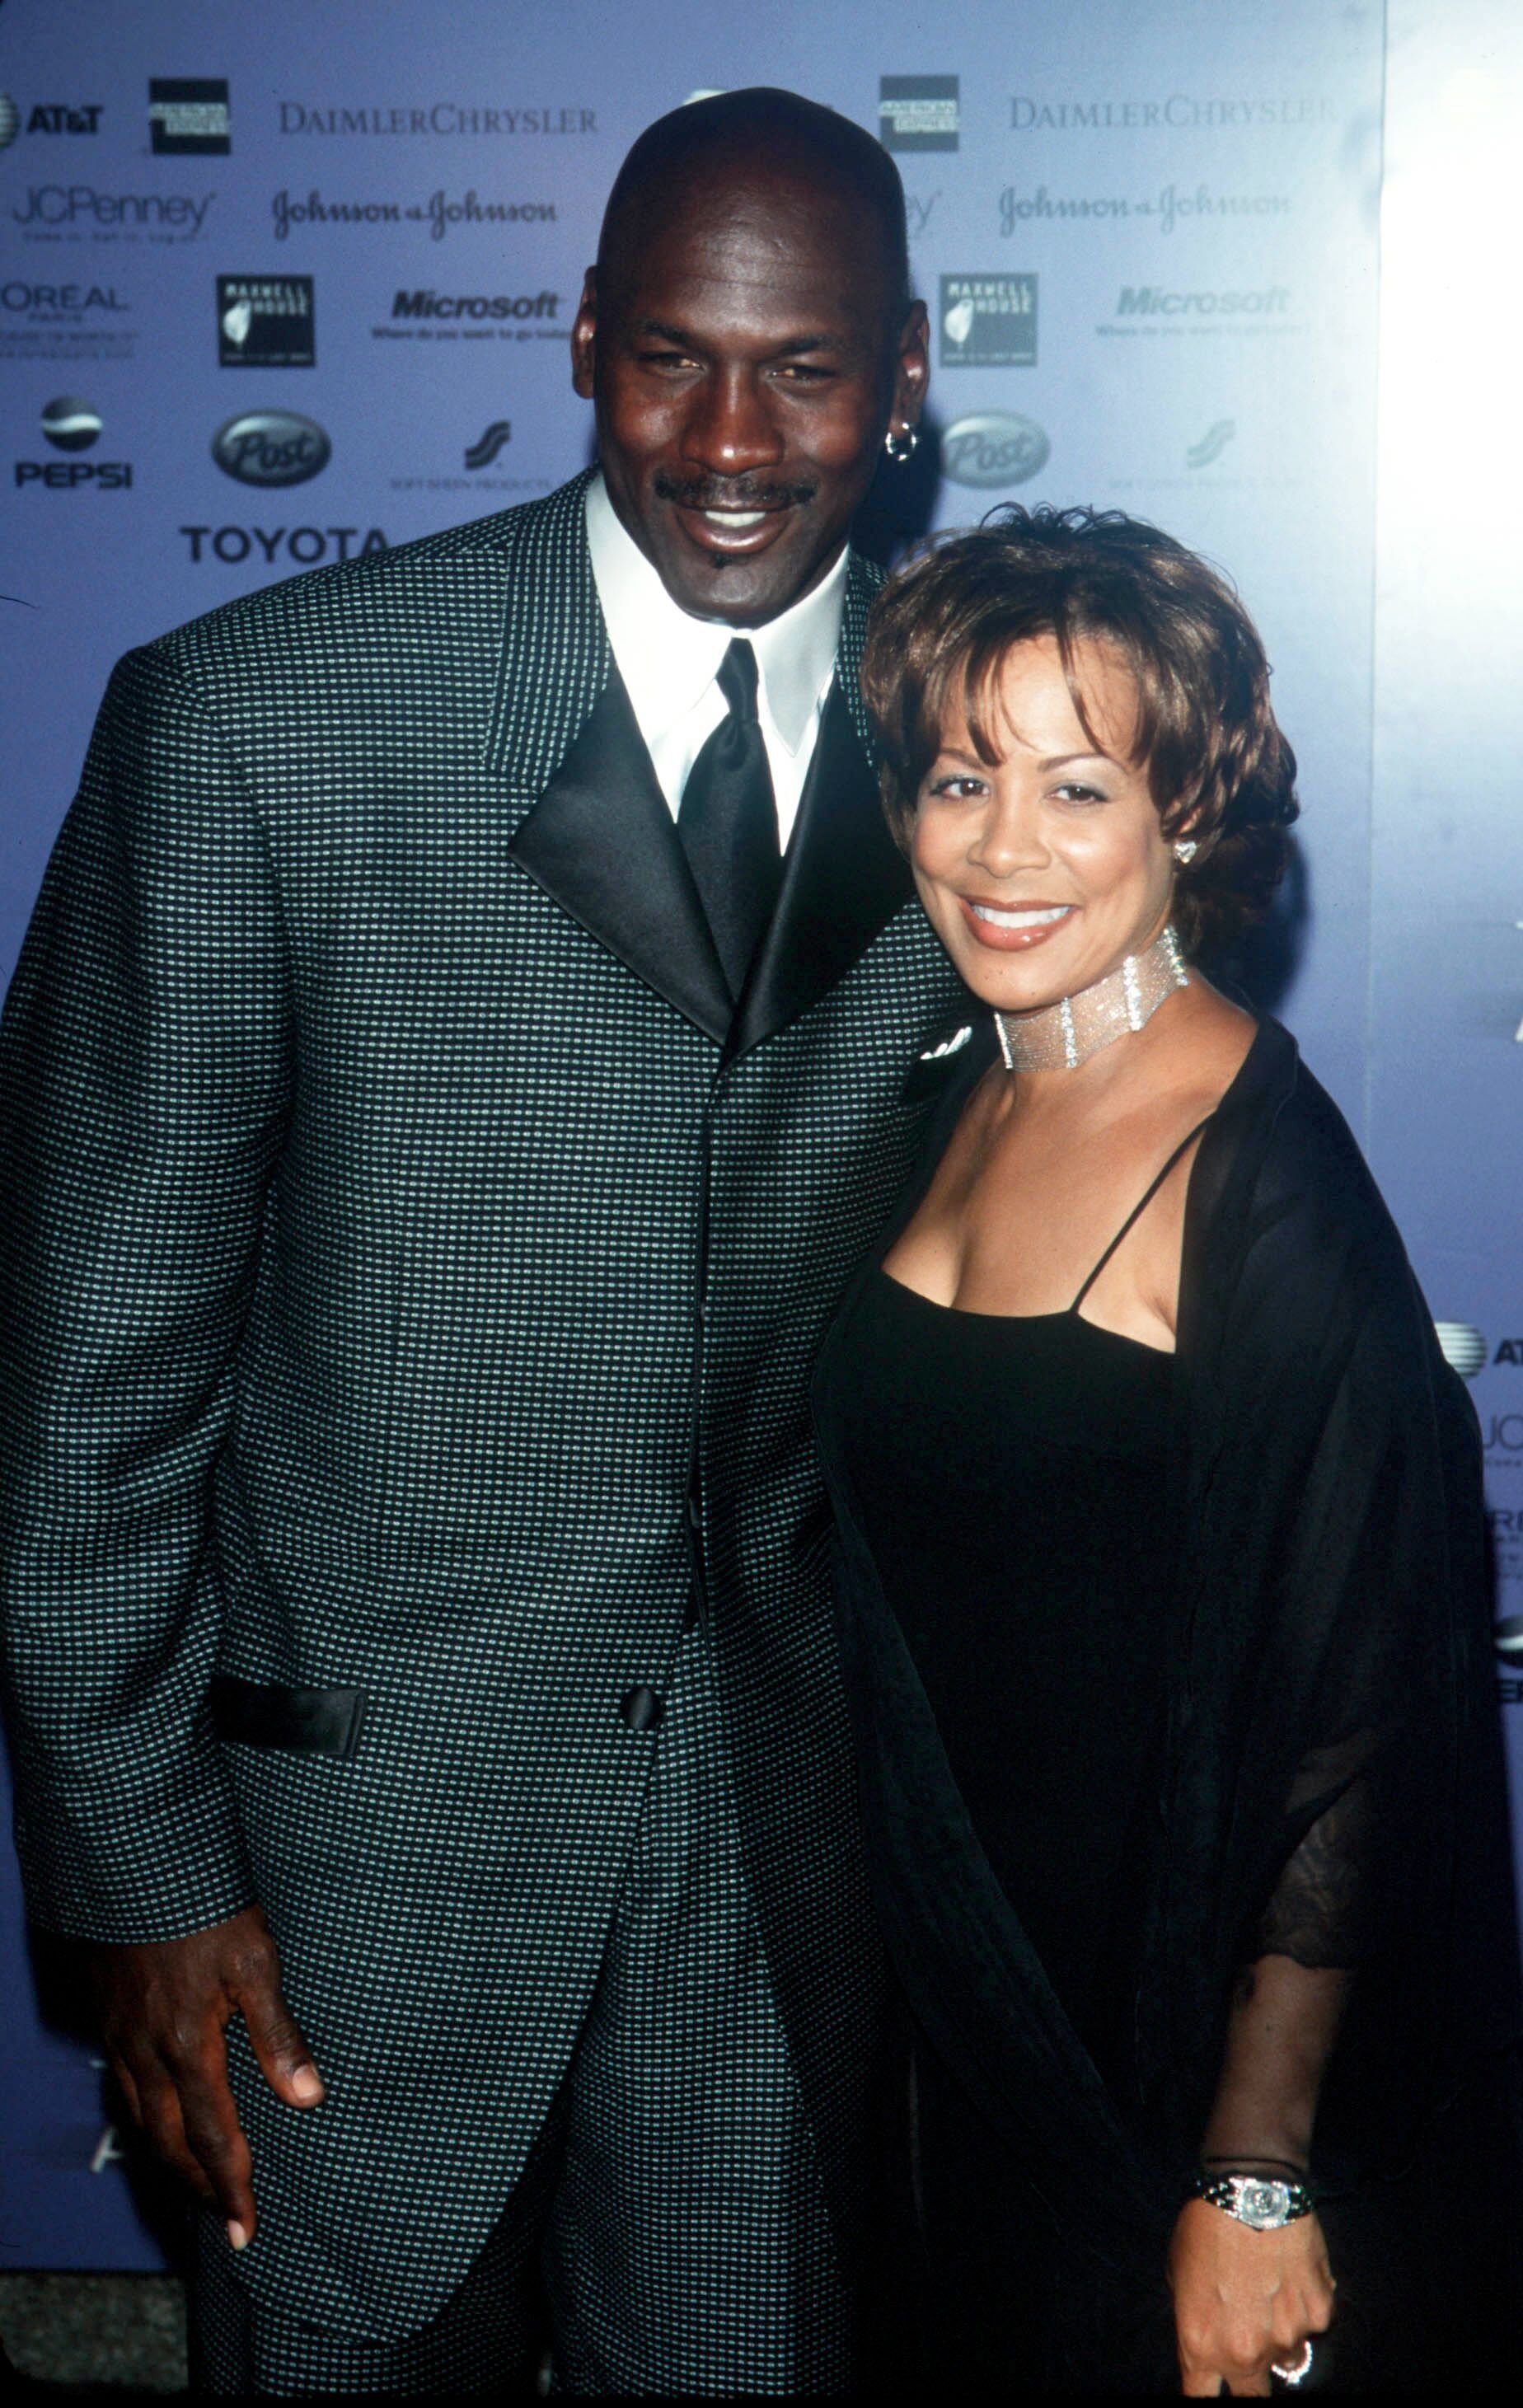 New York City Essence Awards 2000 with Michael Jordan with wife Juanita. | Source: Getty Images